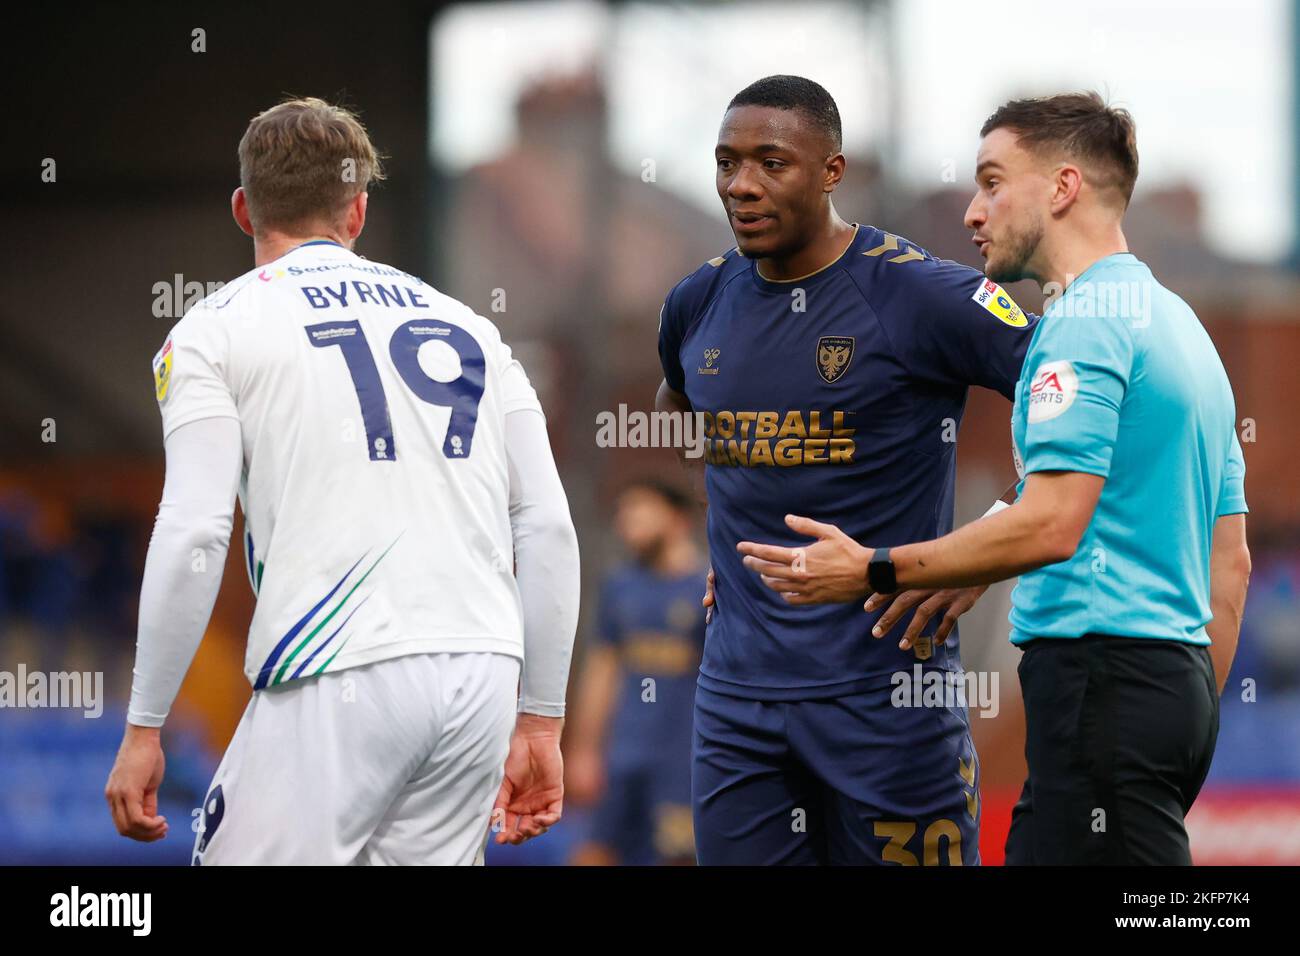 Referee Thomas Kirk talks to Paul Kalambayi #30 of AFC Wimbledon and Neill Byrne #19 of Tranmere Rovers during the Sky Bet League 2 match Tranmere Rovers vs AFC Wimbledon at Prenton Park, Birkenhead, United Kingdom, 19th November 2022  (Photo by Phil Bryan/News Images) Stock Photo